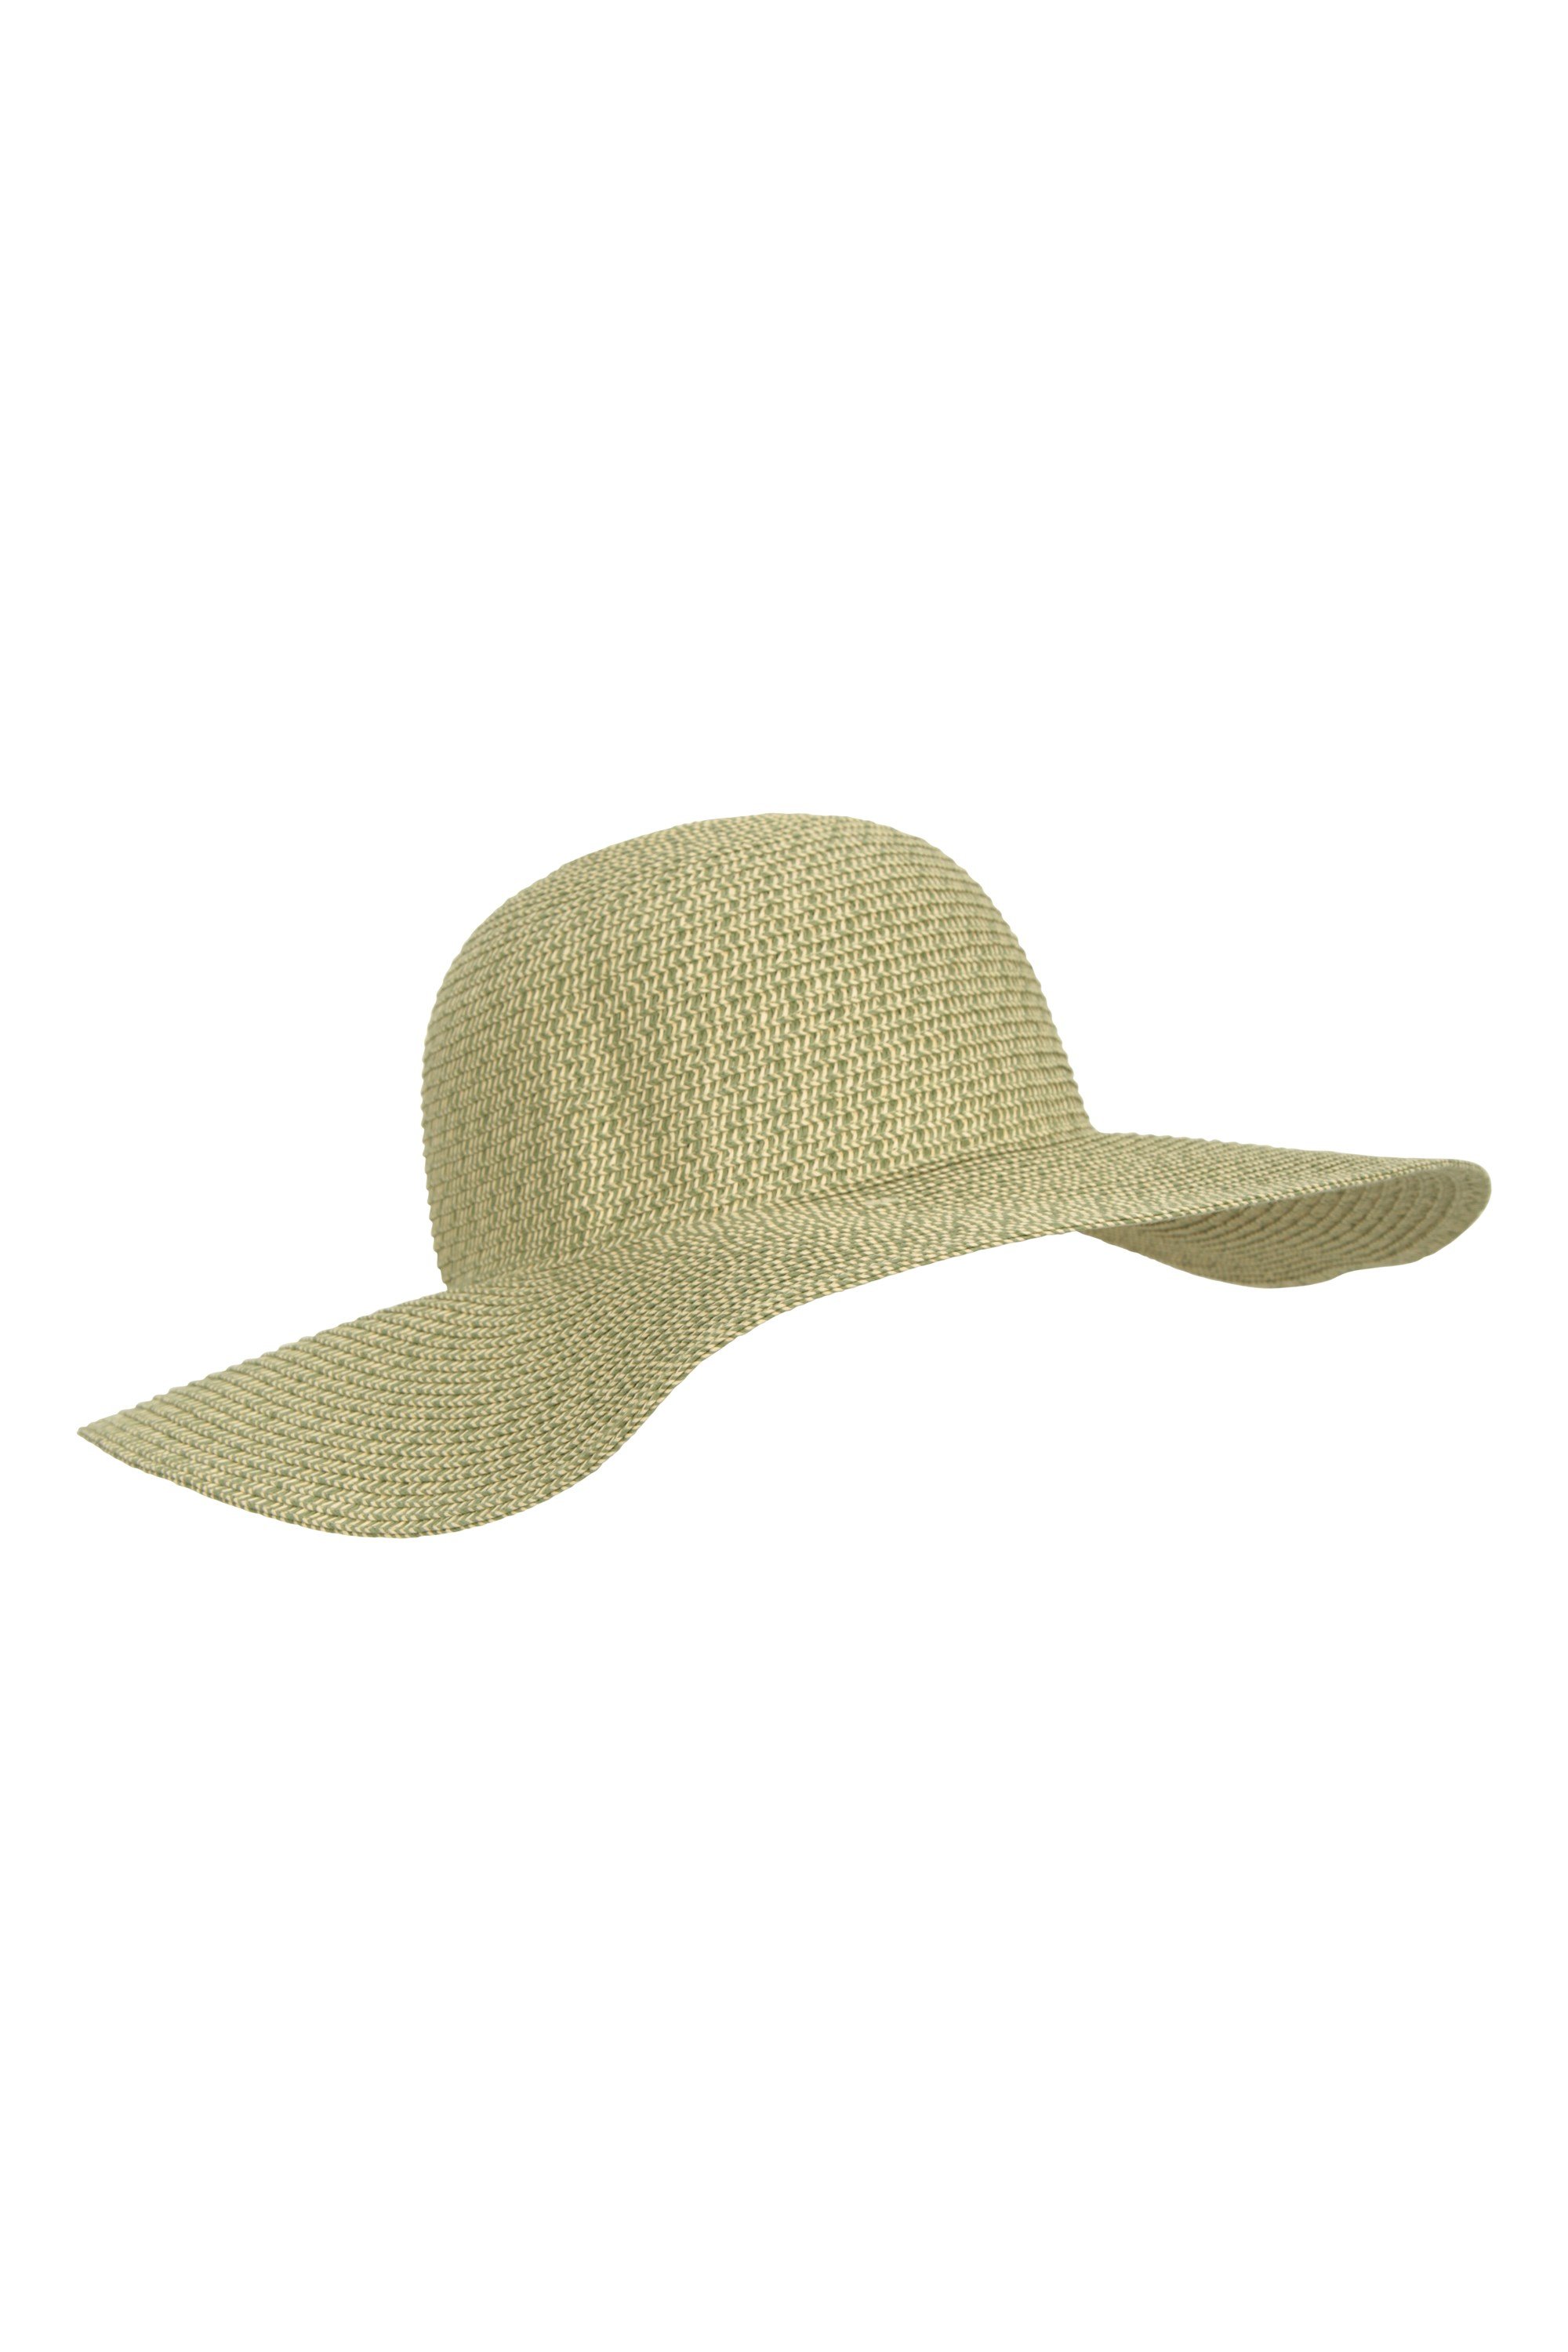 Lily Womens Floppy Hat - Green